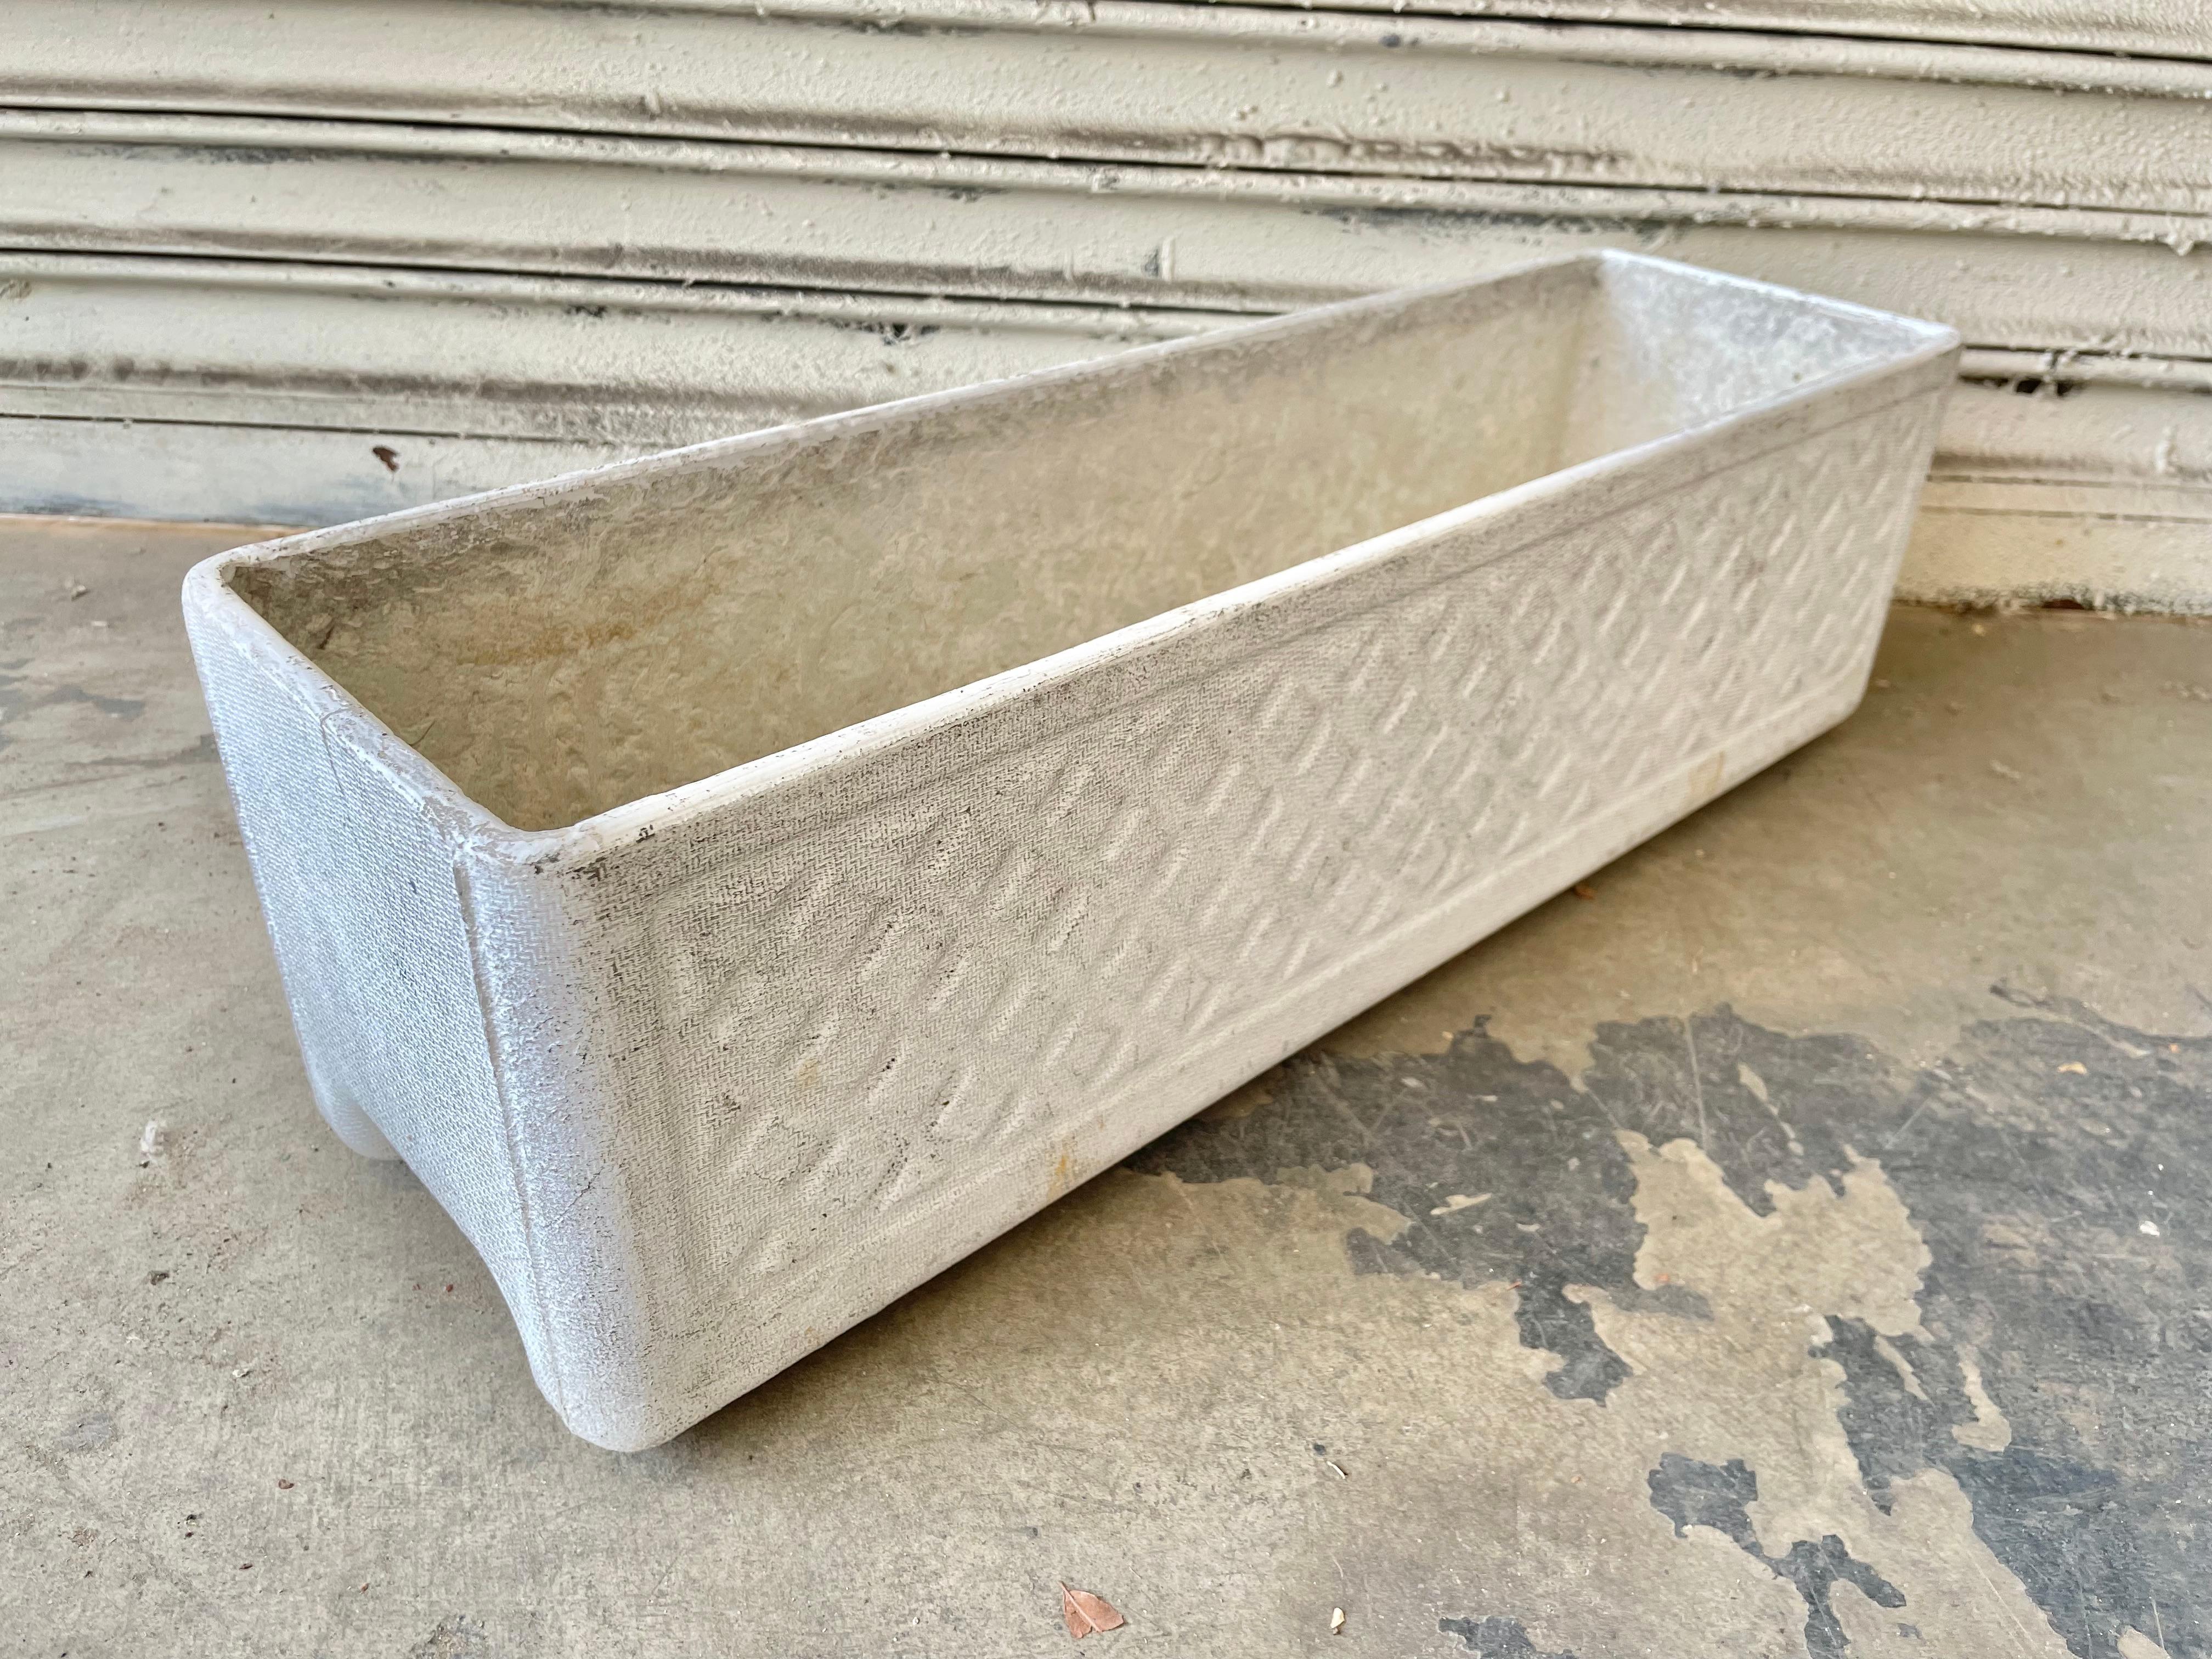 Concrete trough planters by Swiss architect Willy Guhl. Just under 24